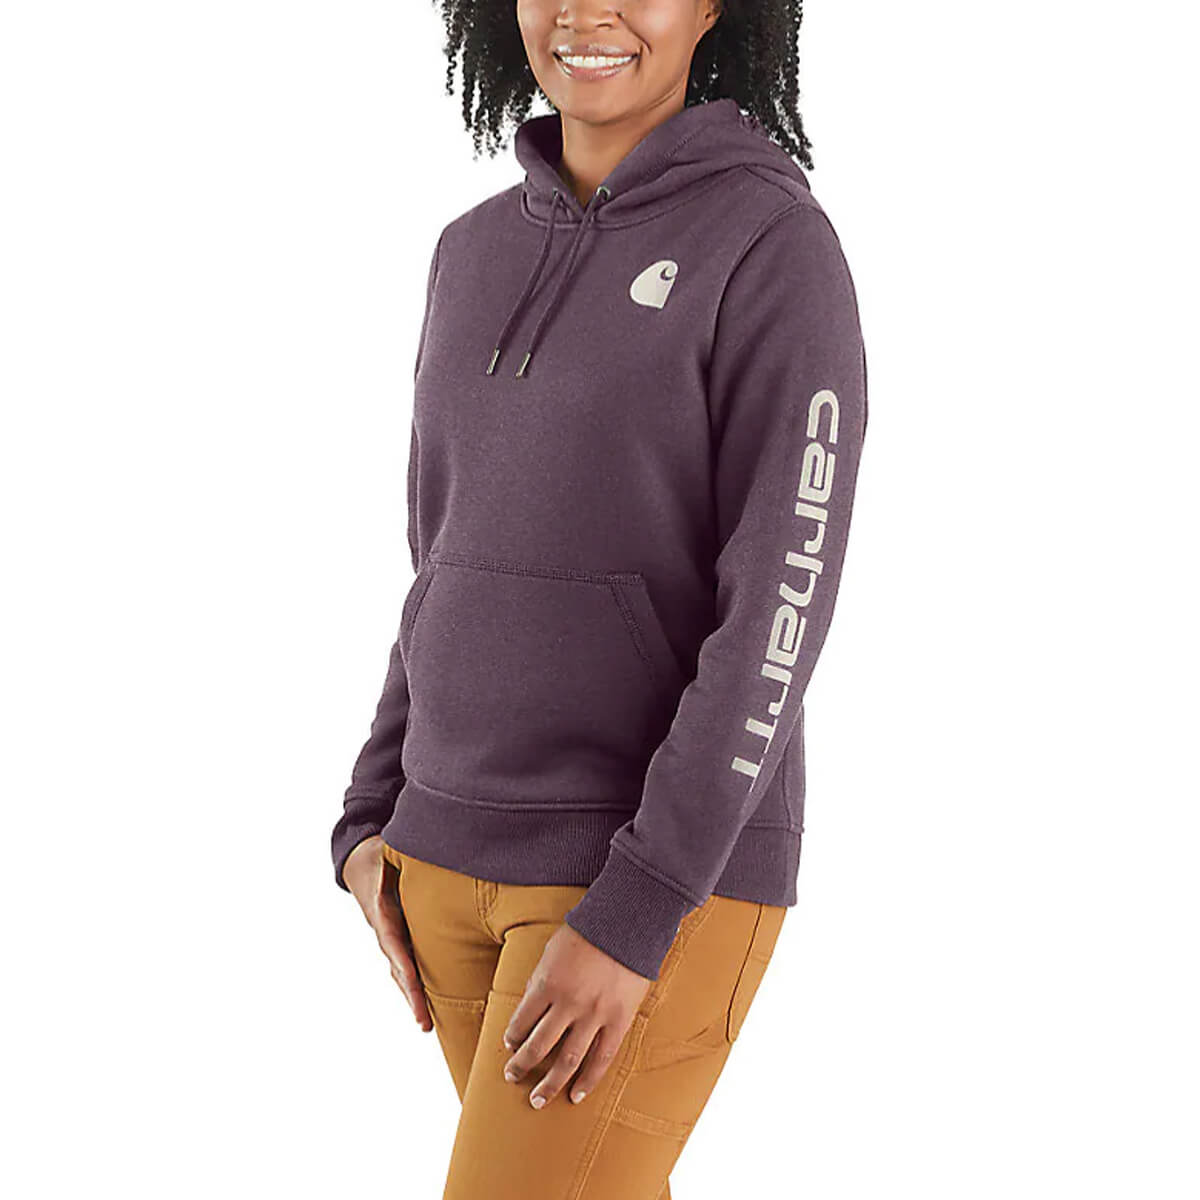 Women's Relaxed Fit Midweight Graphic Sweatshirt - Blackberry Heather